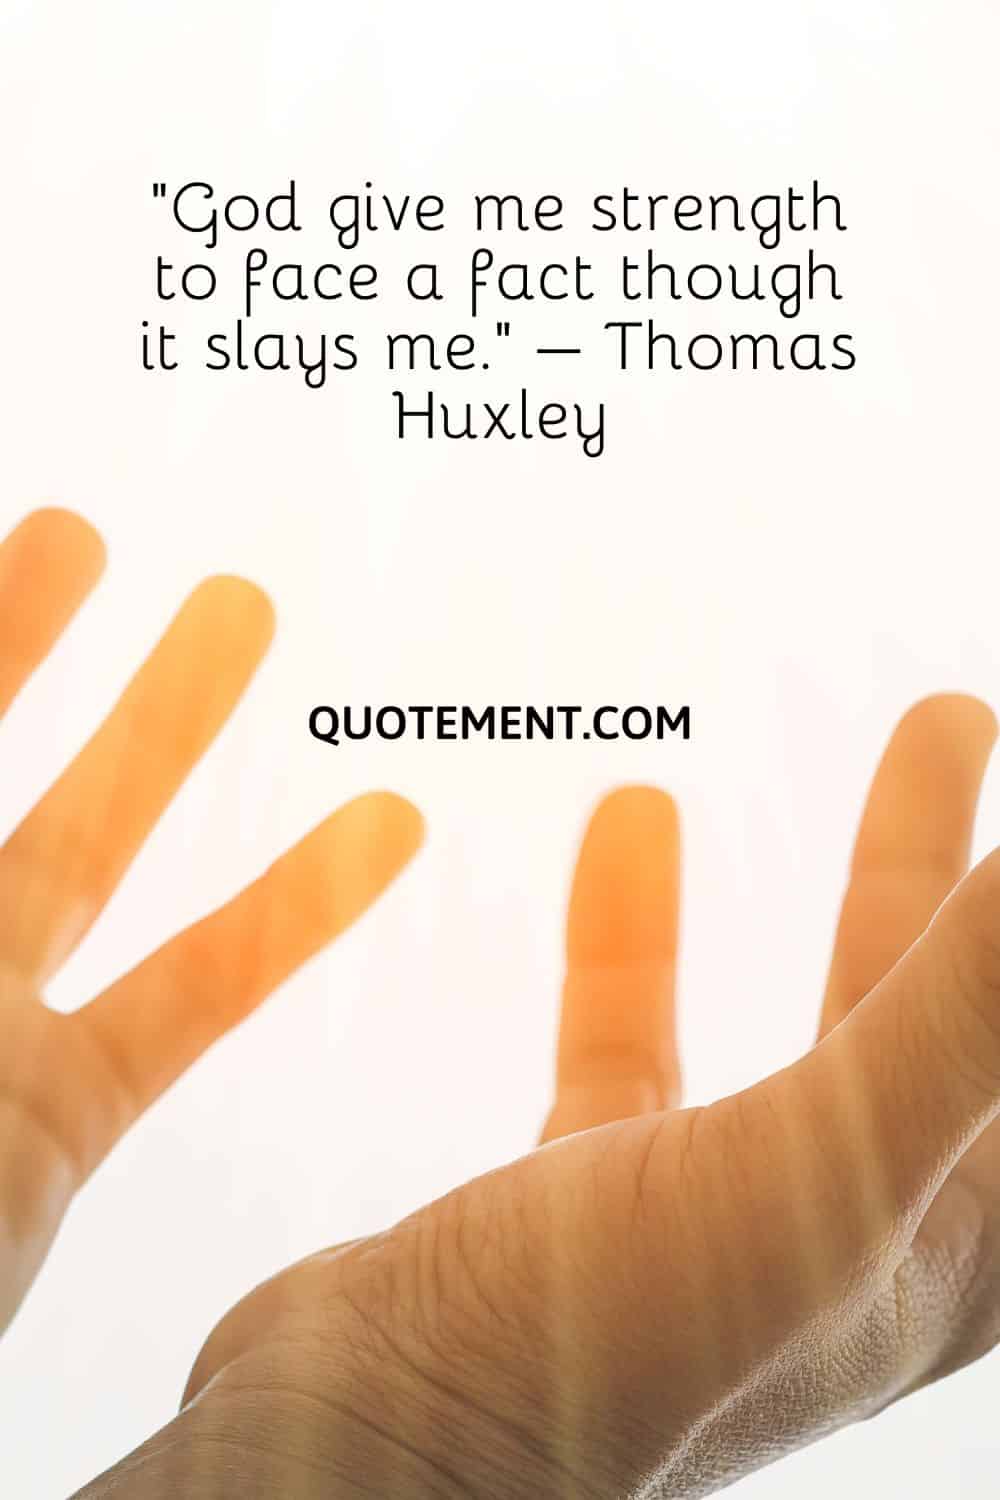 “God give me strength to face a fact though it slays me.” – Thomas Huxley